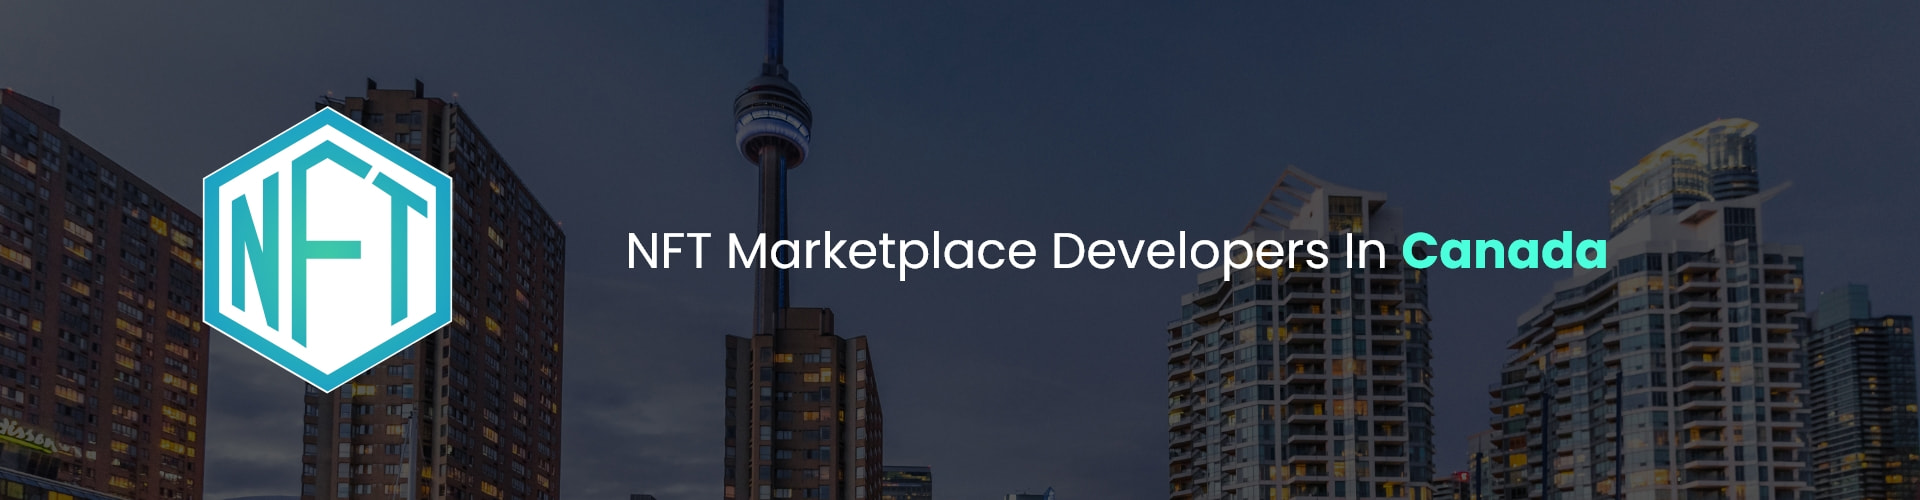 hire nft marketplace developers in Canada